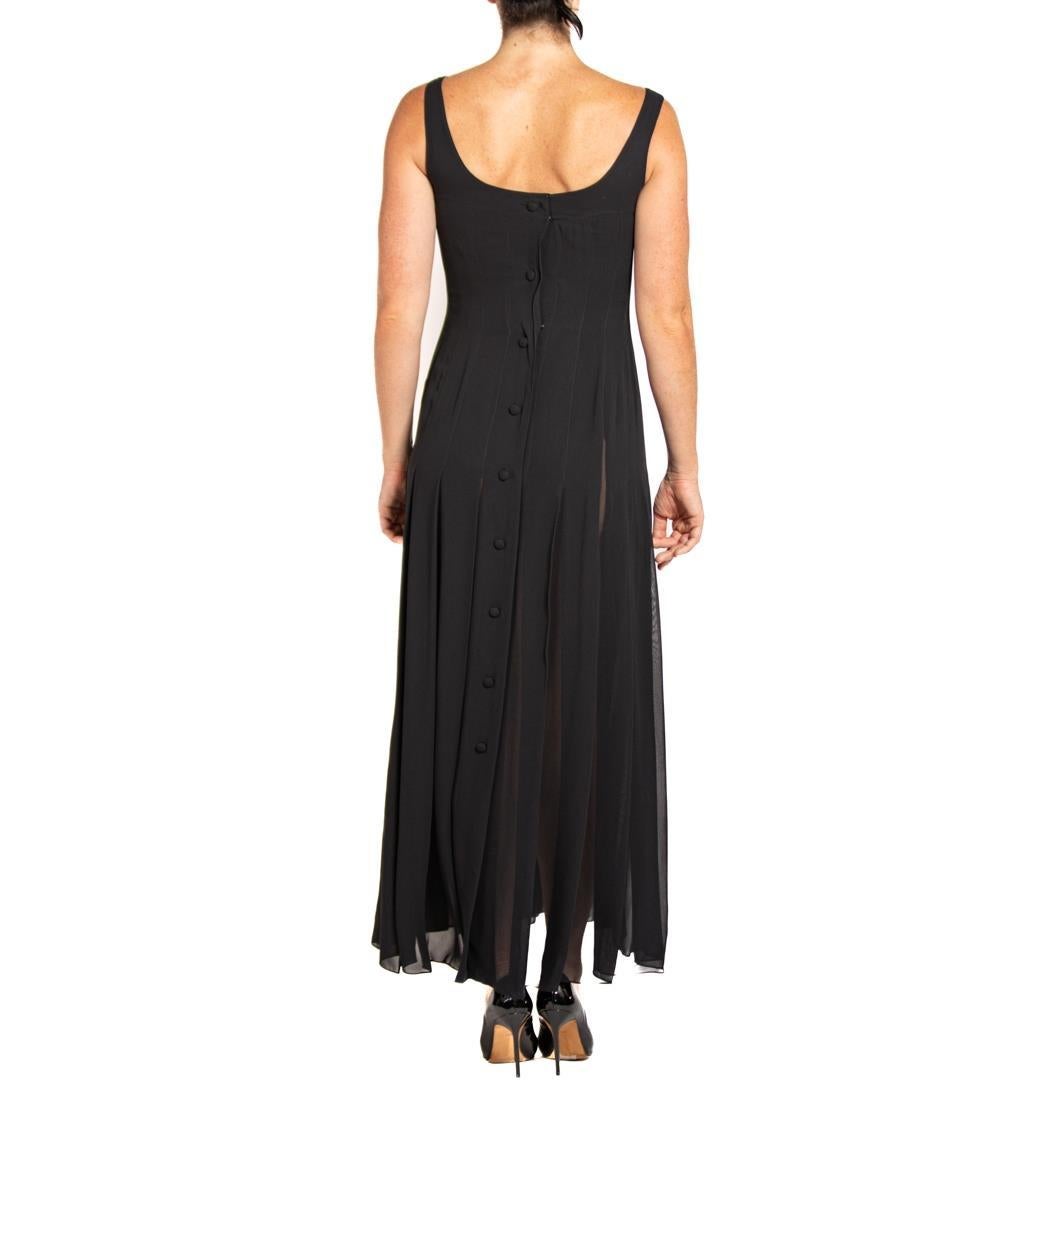 1990S PERRY ELLIS Black Rayon Blend Crepe Chiffon Pleated Dress With Buttons For Sale 4